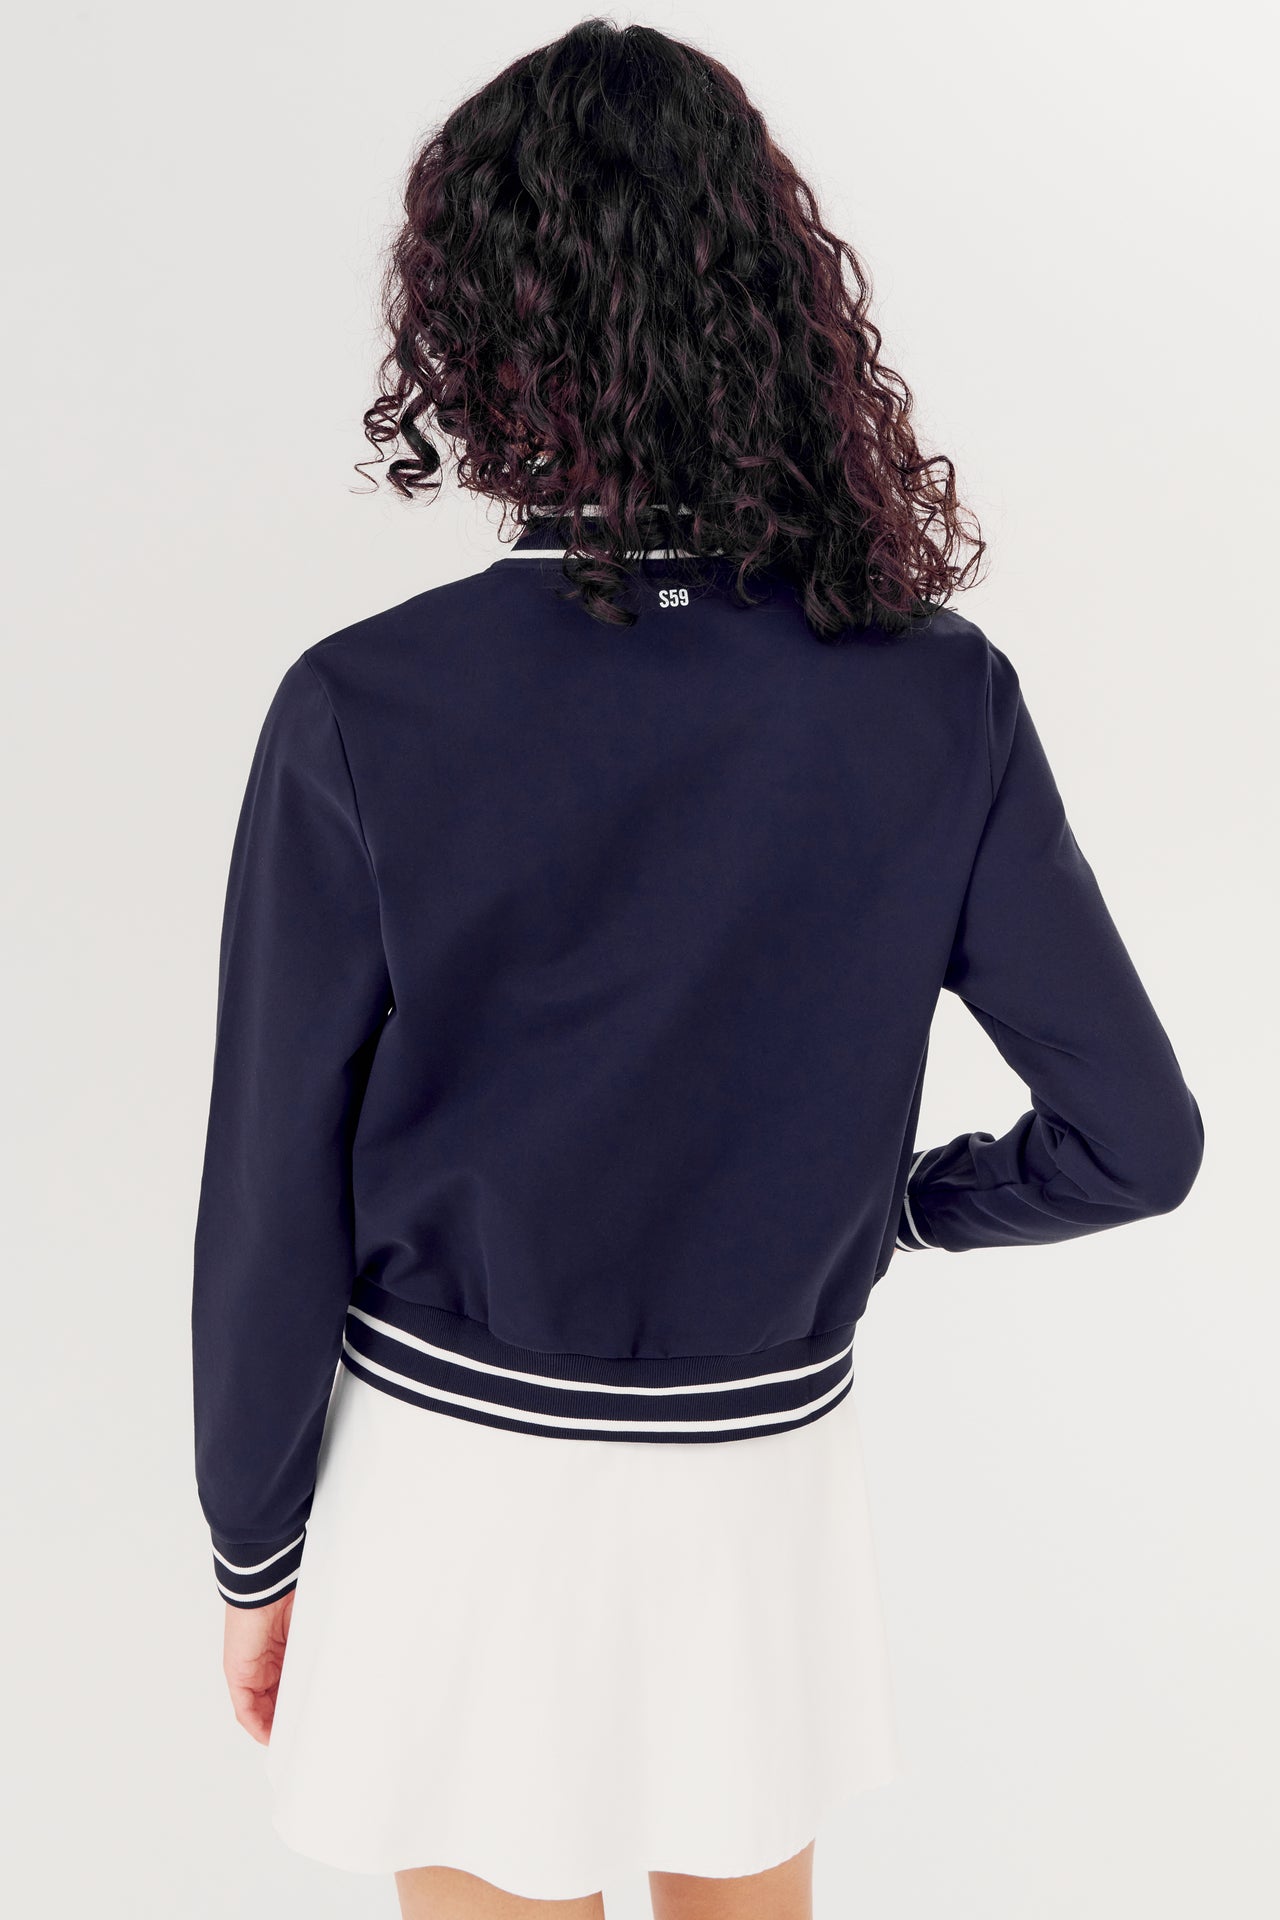 A person seen from behind wearing a SPLITS59 Ever Supplex Jacket in Indigo and white skirt.